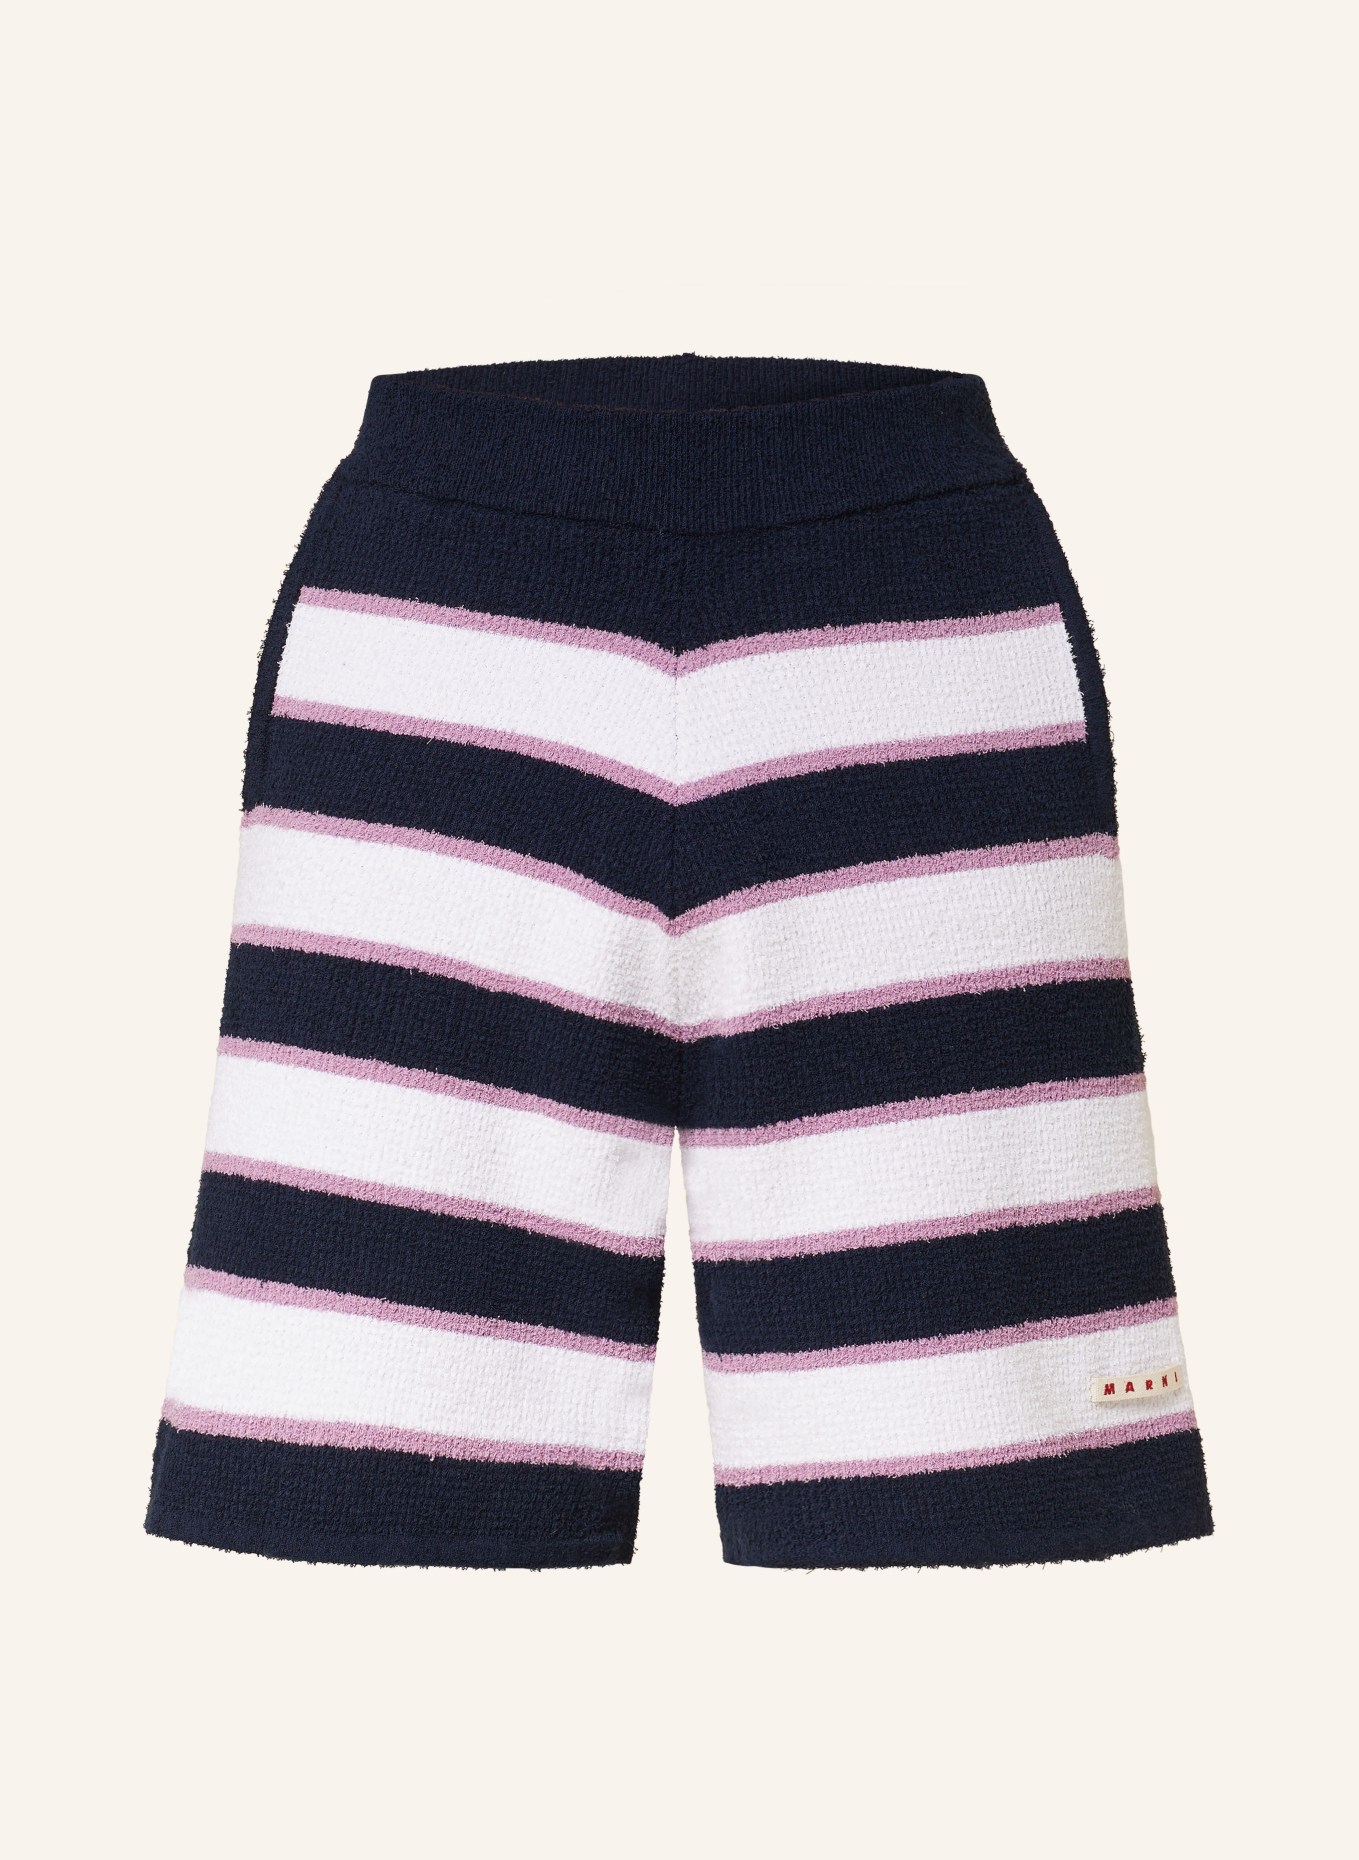 MARNI Terry cloth shorts, Color: DARK BLUE/ WHITE/ DUSKY PINK (Image 1)